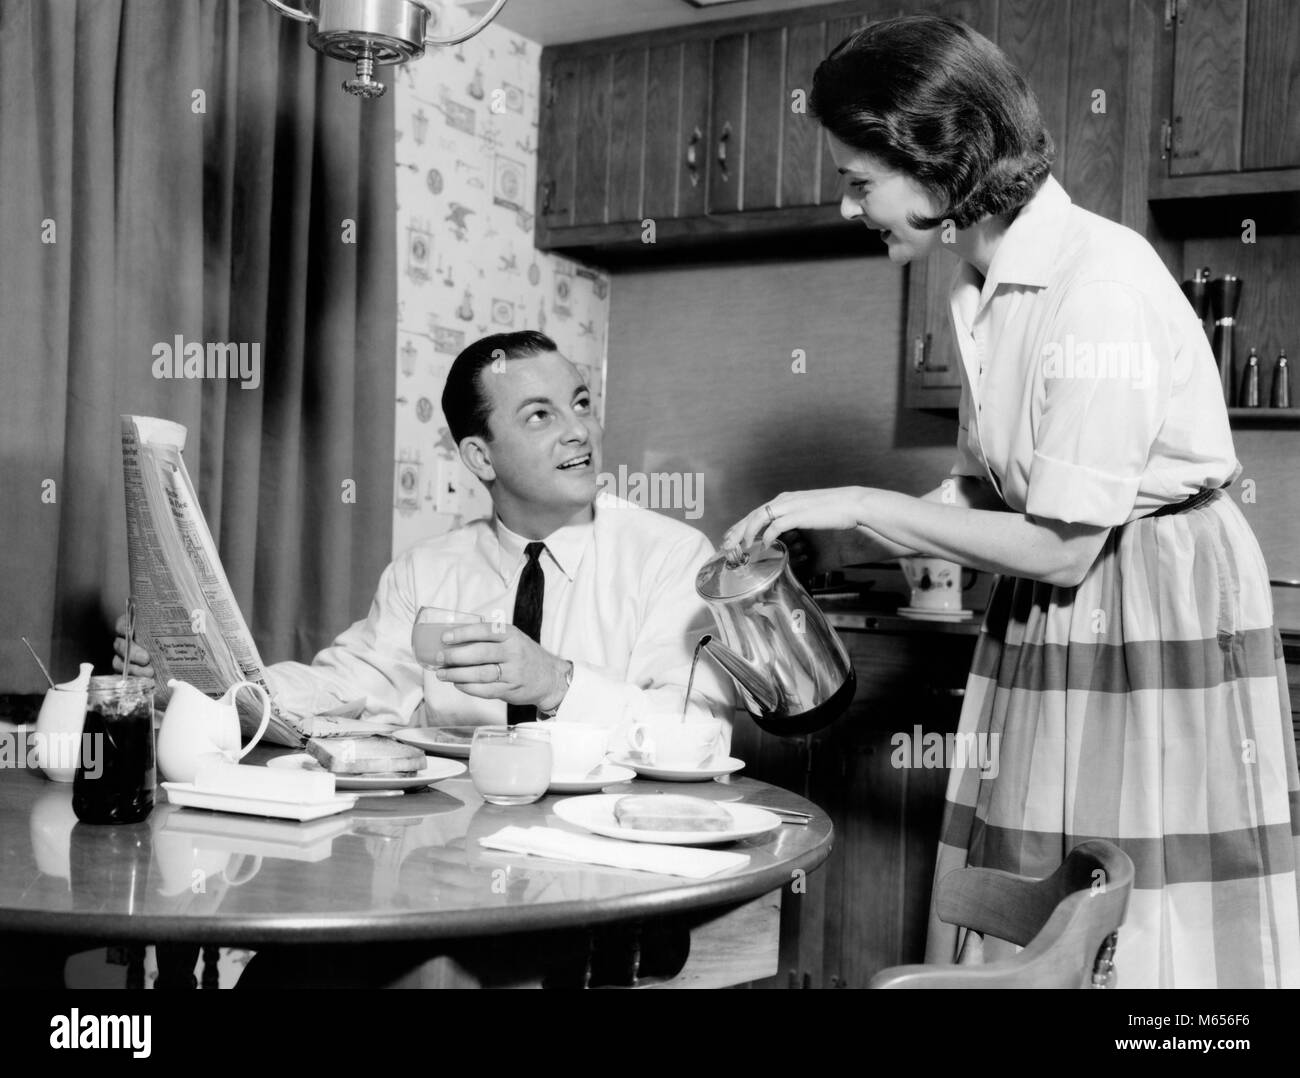 https://c8.alamy.com/comp/M656F6/1960s-wife-pouring-breakfast-coffee-for-husband-drinking-juice-reading-M656F6.jpg